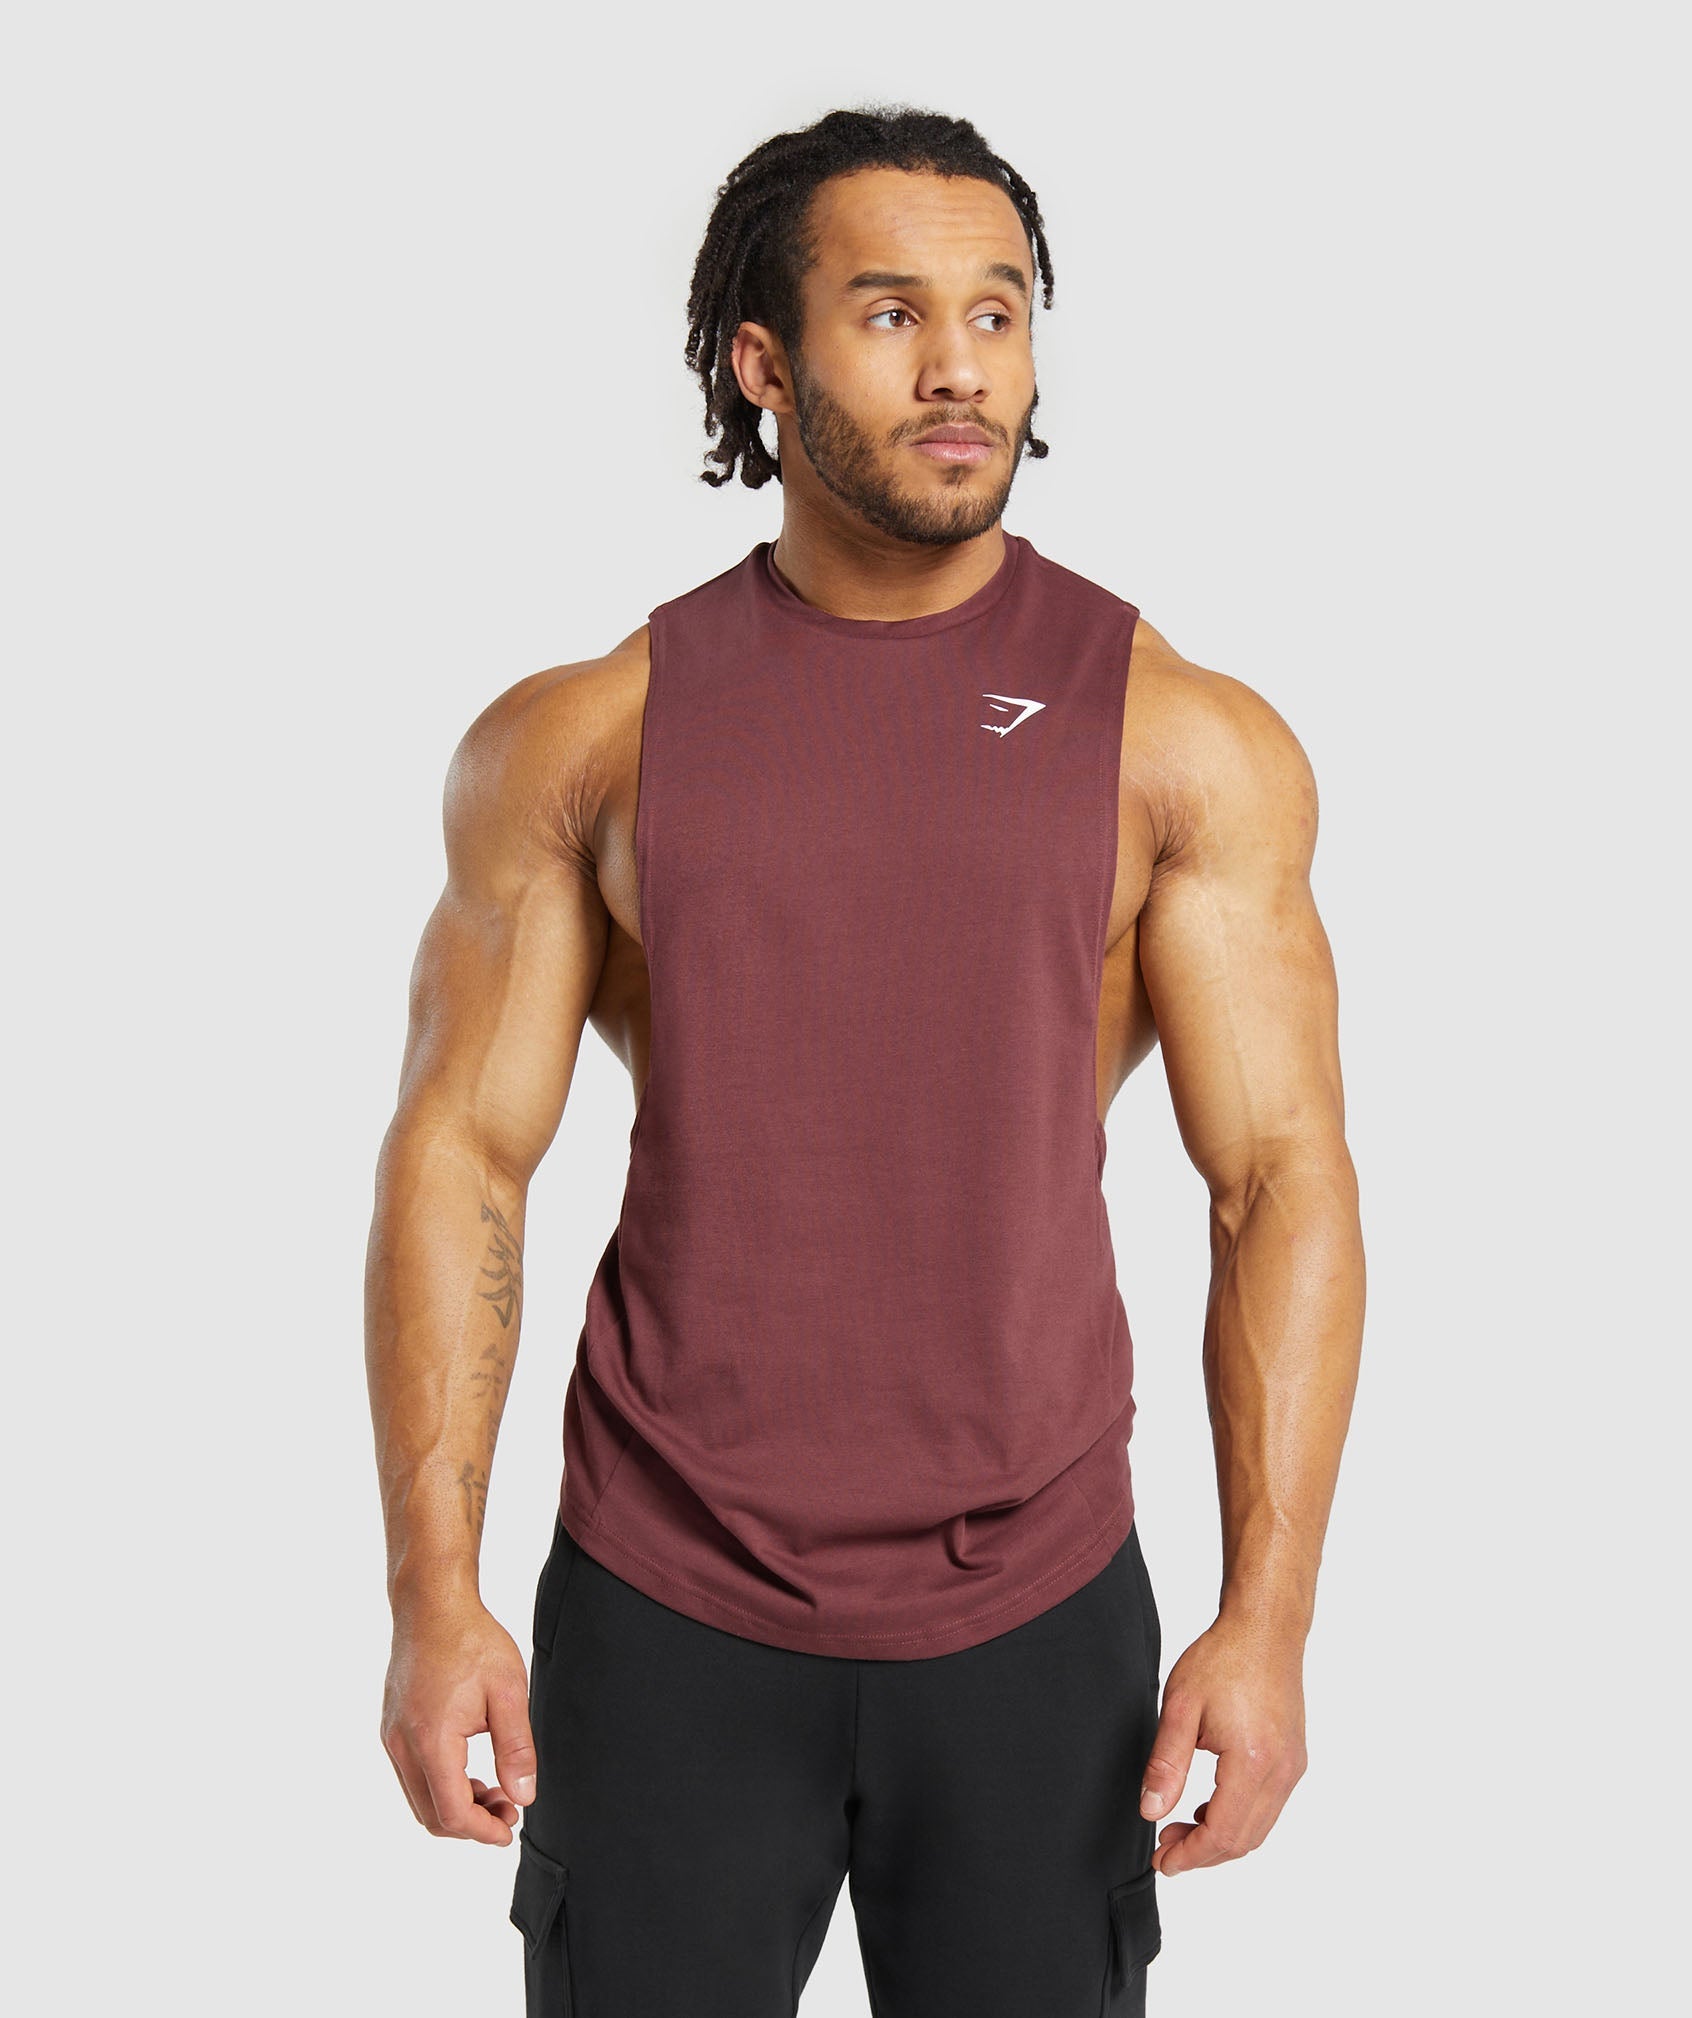 React Drop Arm Tank in Burgundy Brown is out of stock